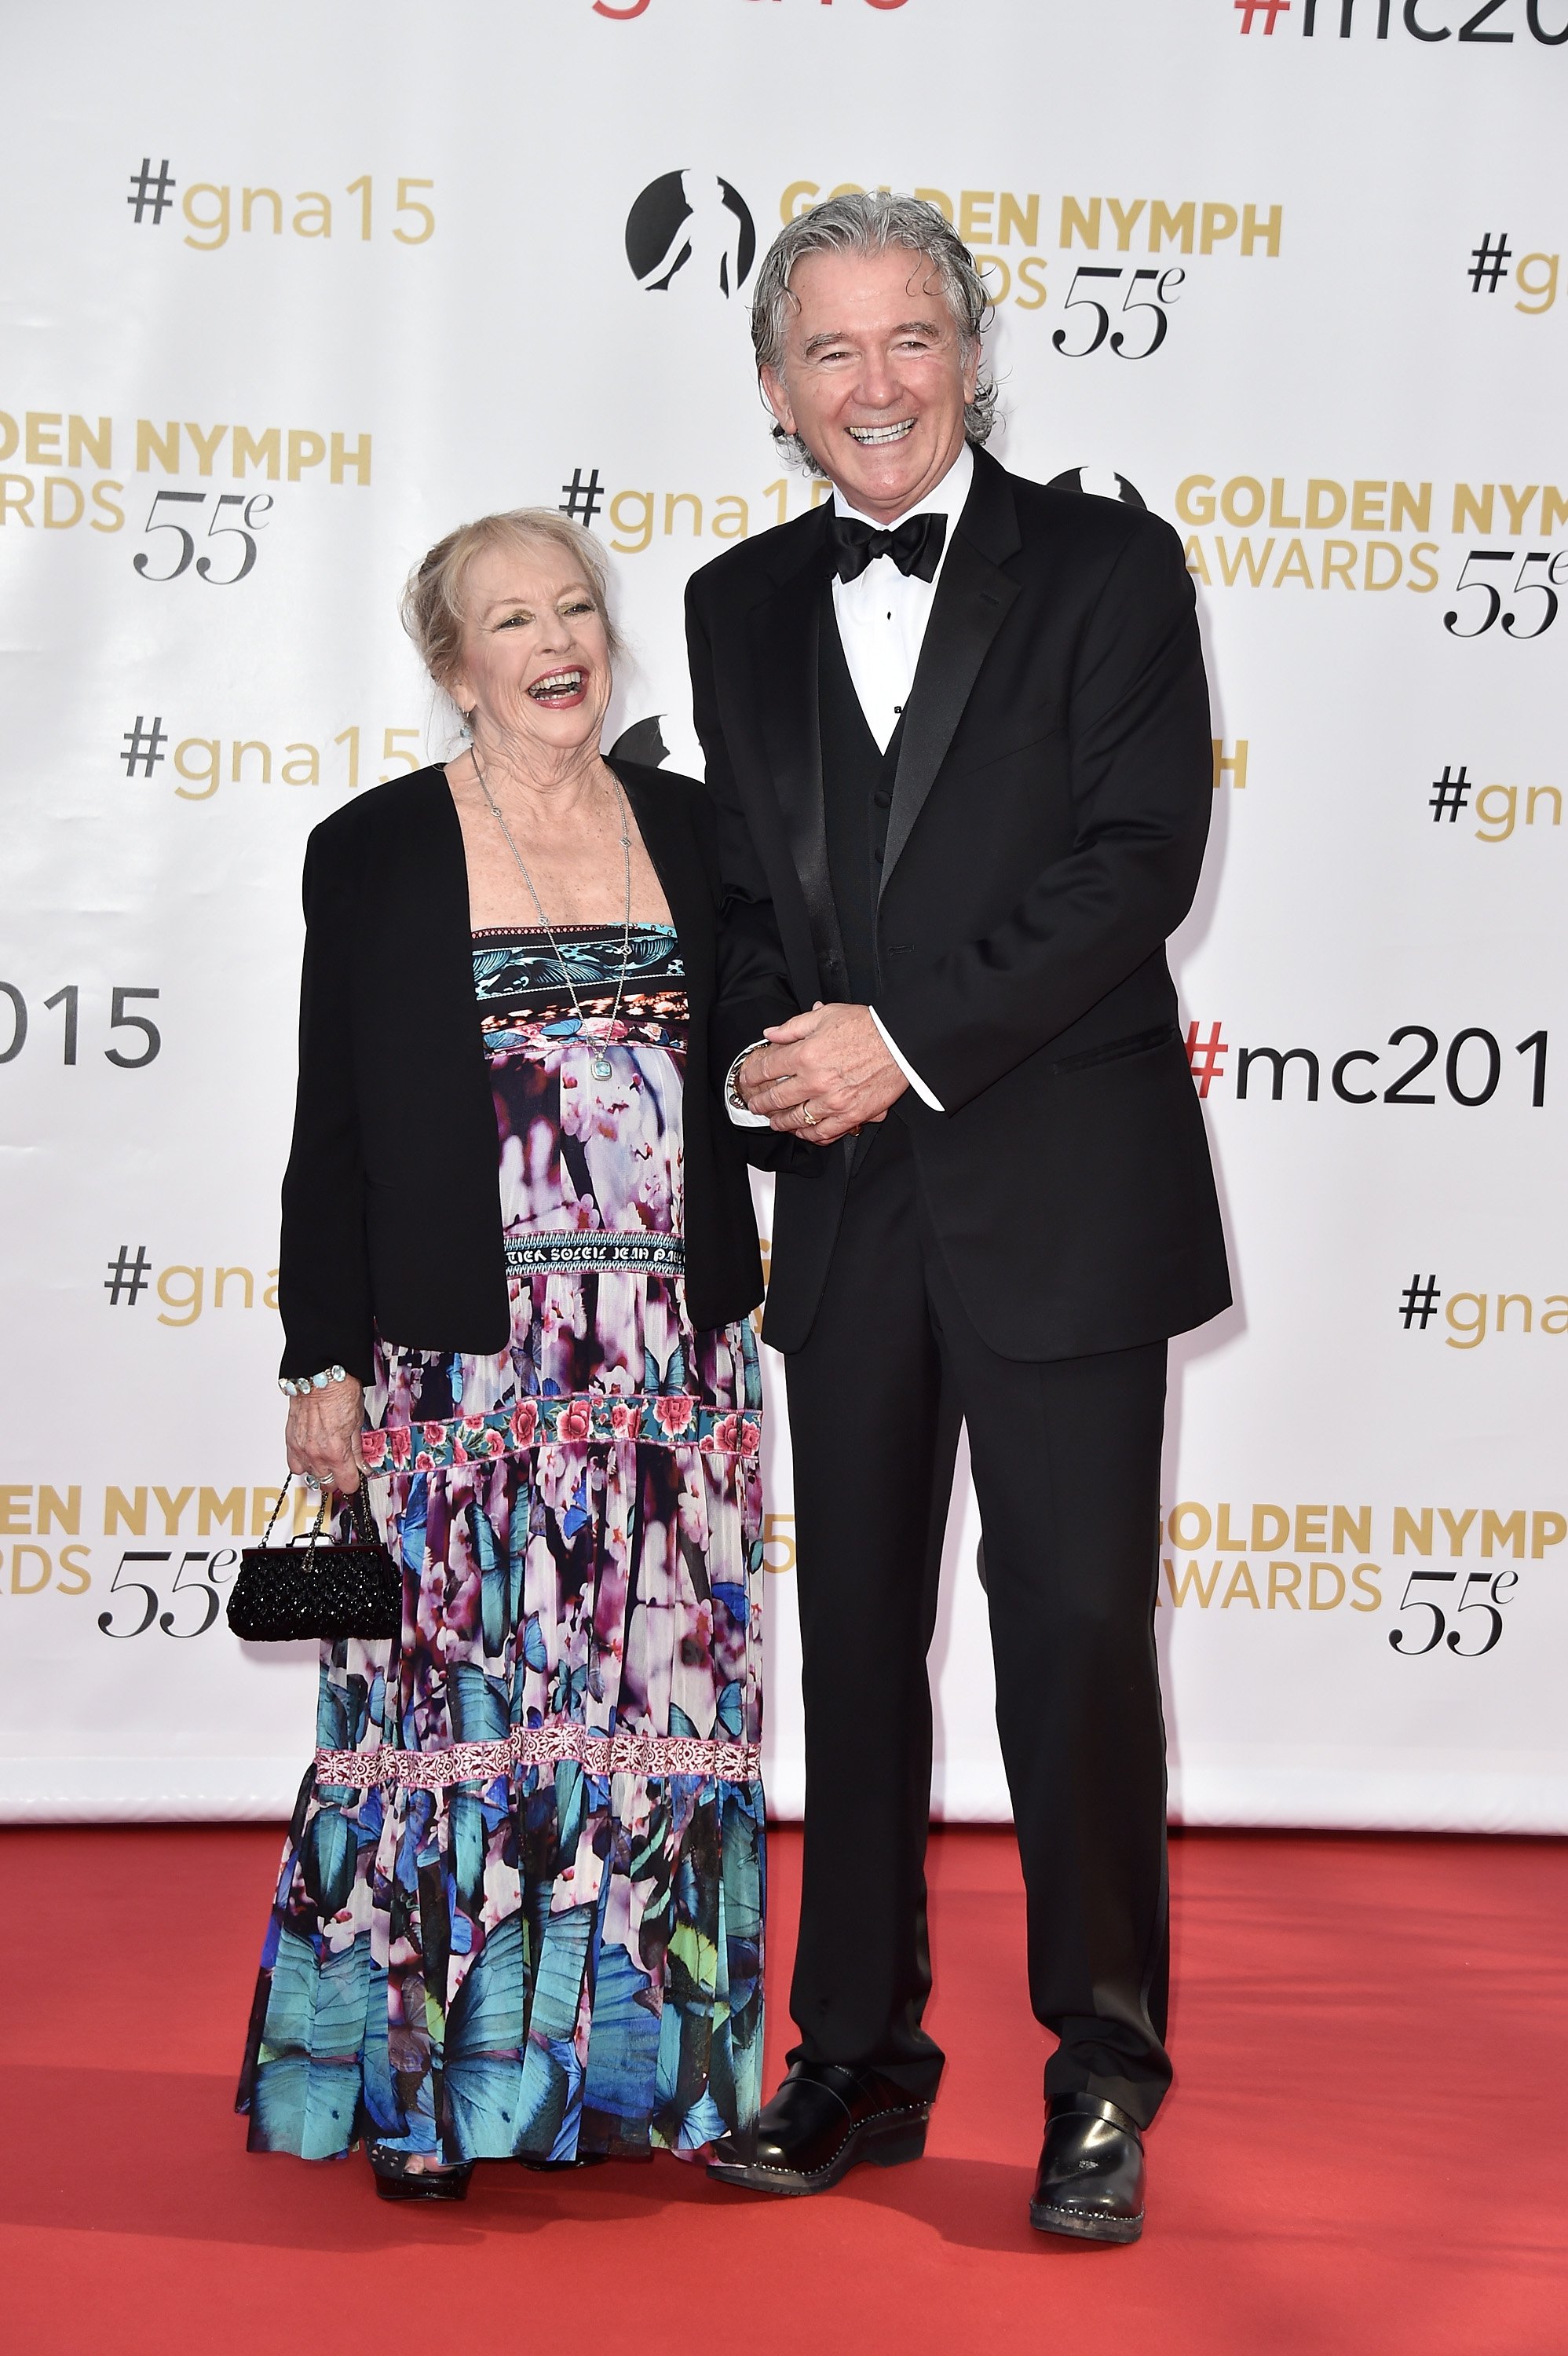 Patrick Duffy and his wife Carlyn Rosser attend the Golden Nymph Awards on June 18, 2015 in Monaco. | Photo: Getty Images